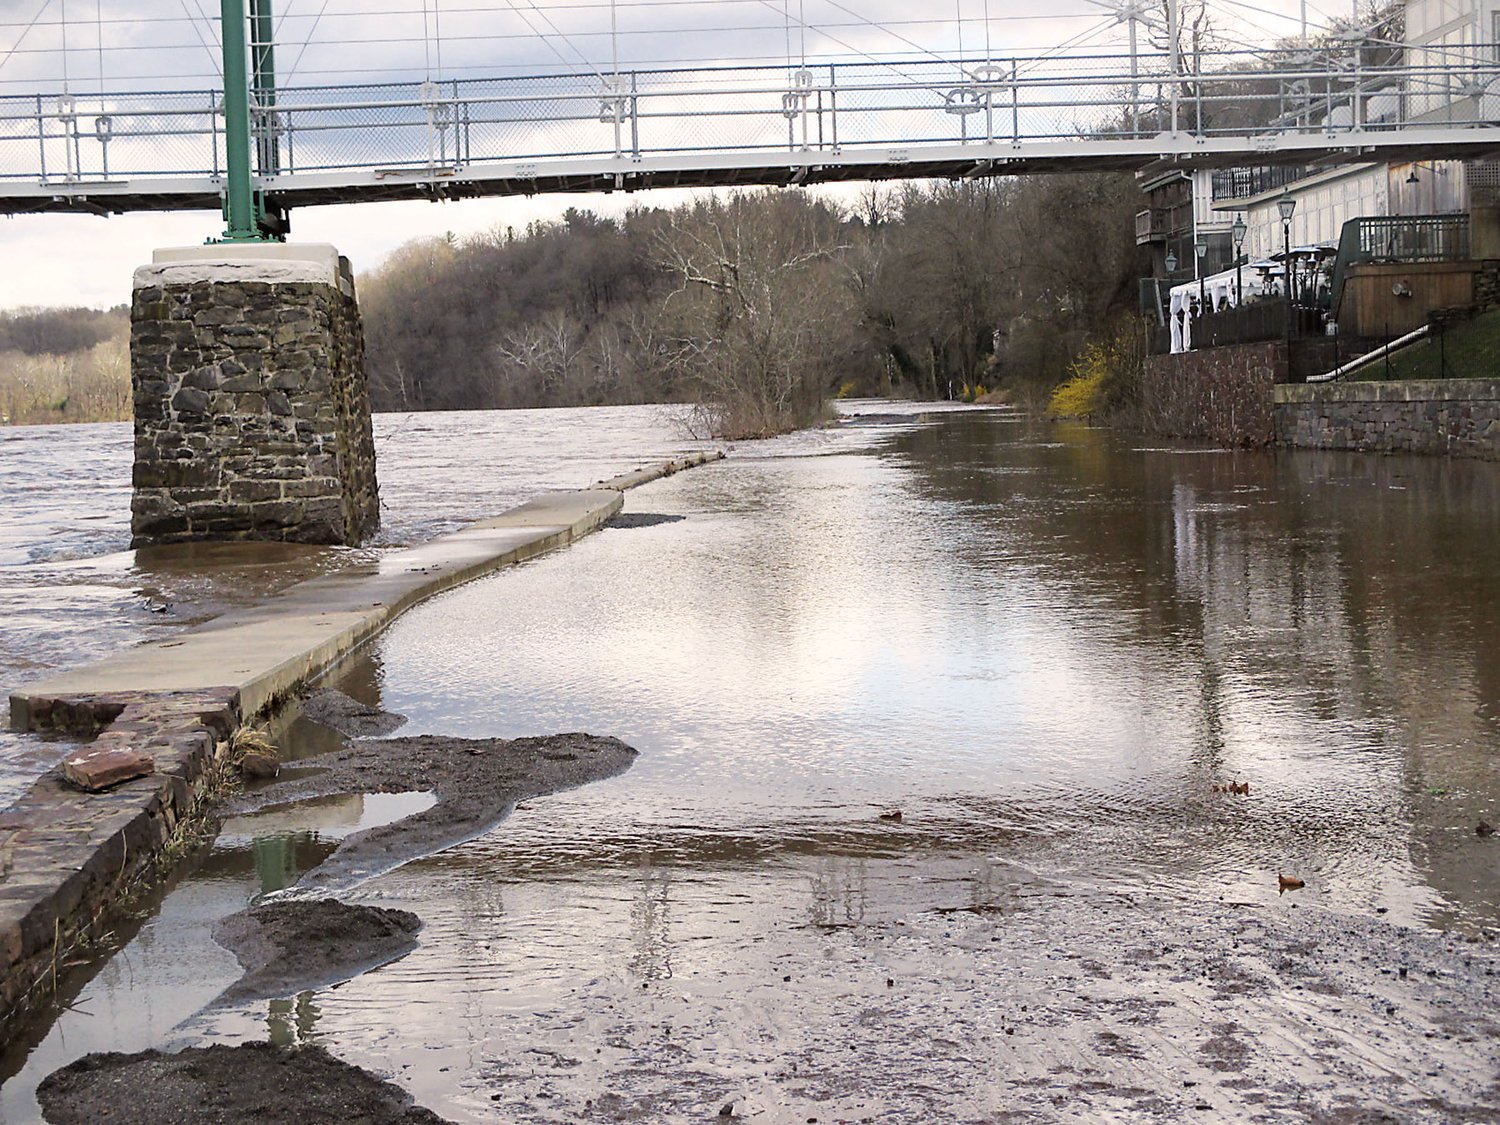 The canal path beside the Black Bass in Lumberville is under water, after the Delaware River is seen rising over its banks there.